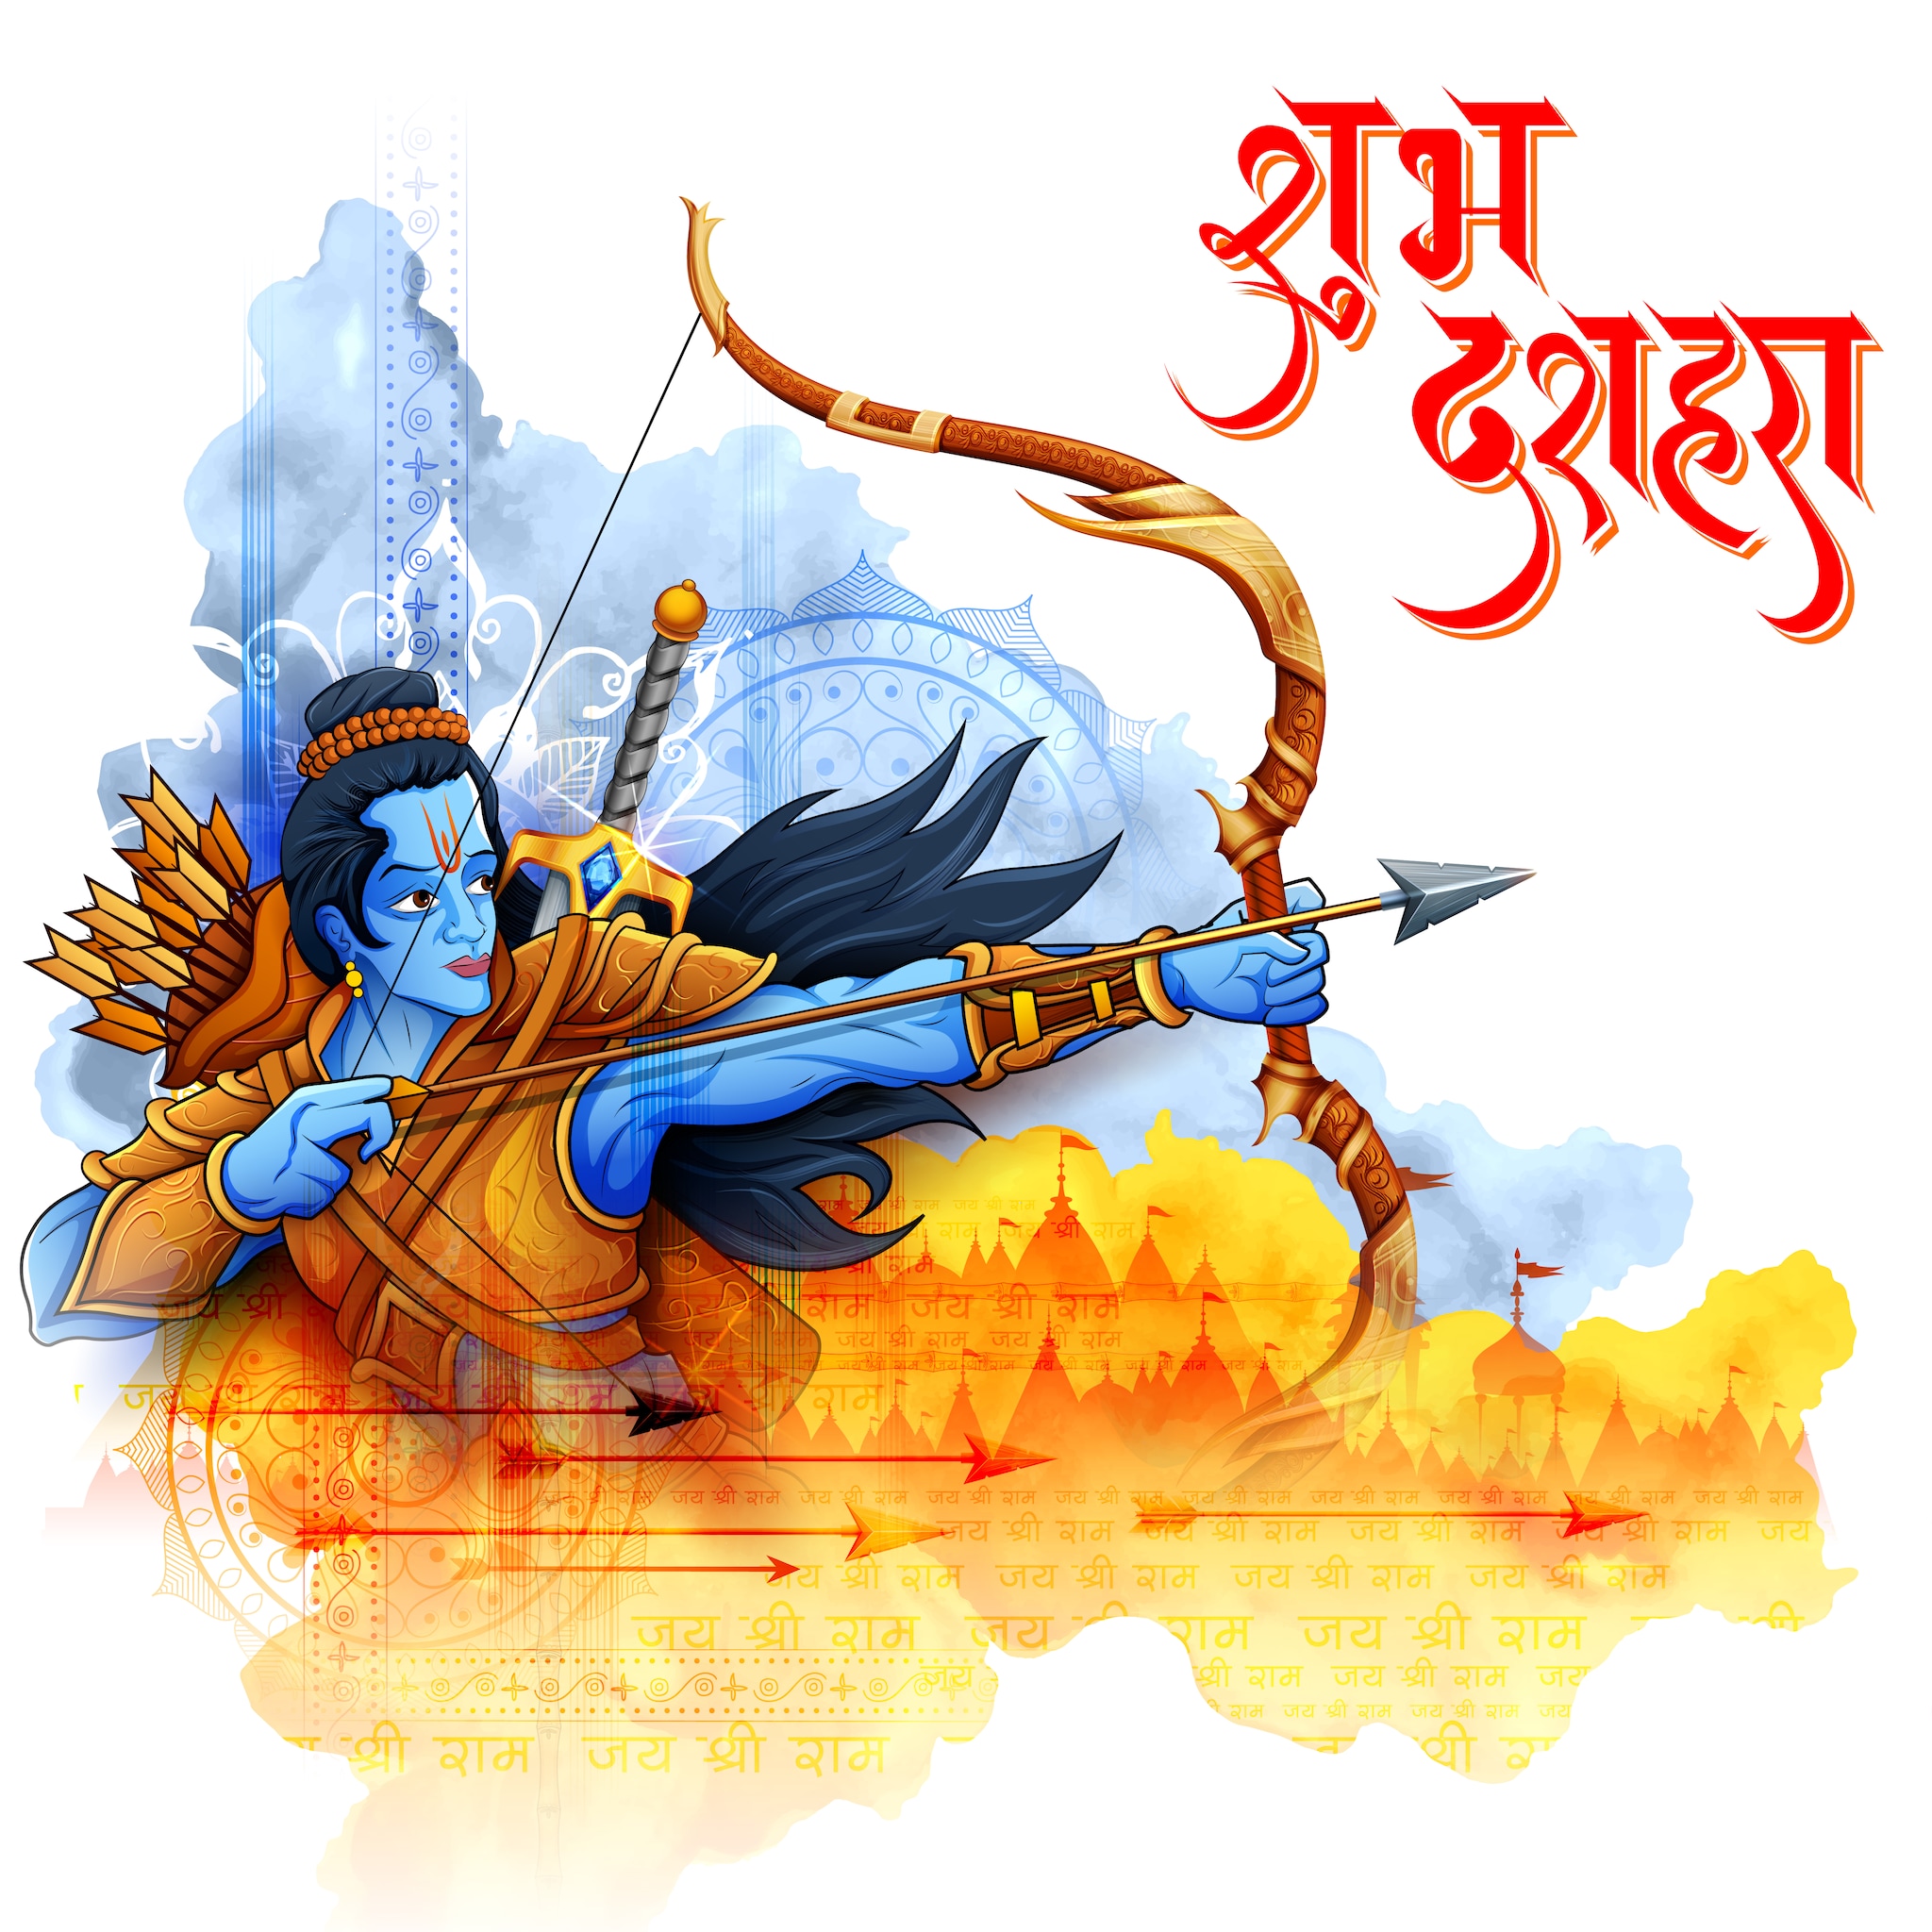 Happy Dussehra 2021 Images Wishes Quotes Messages And Whatsapp